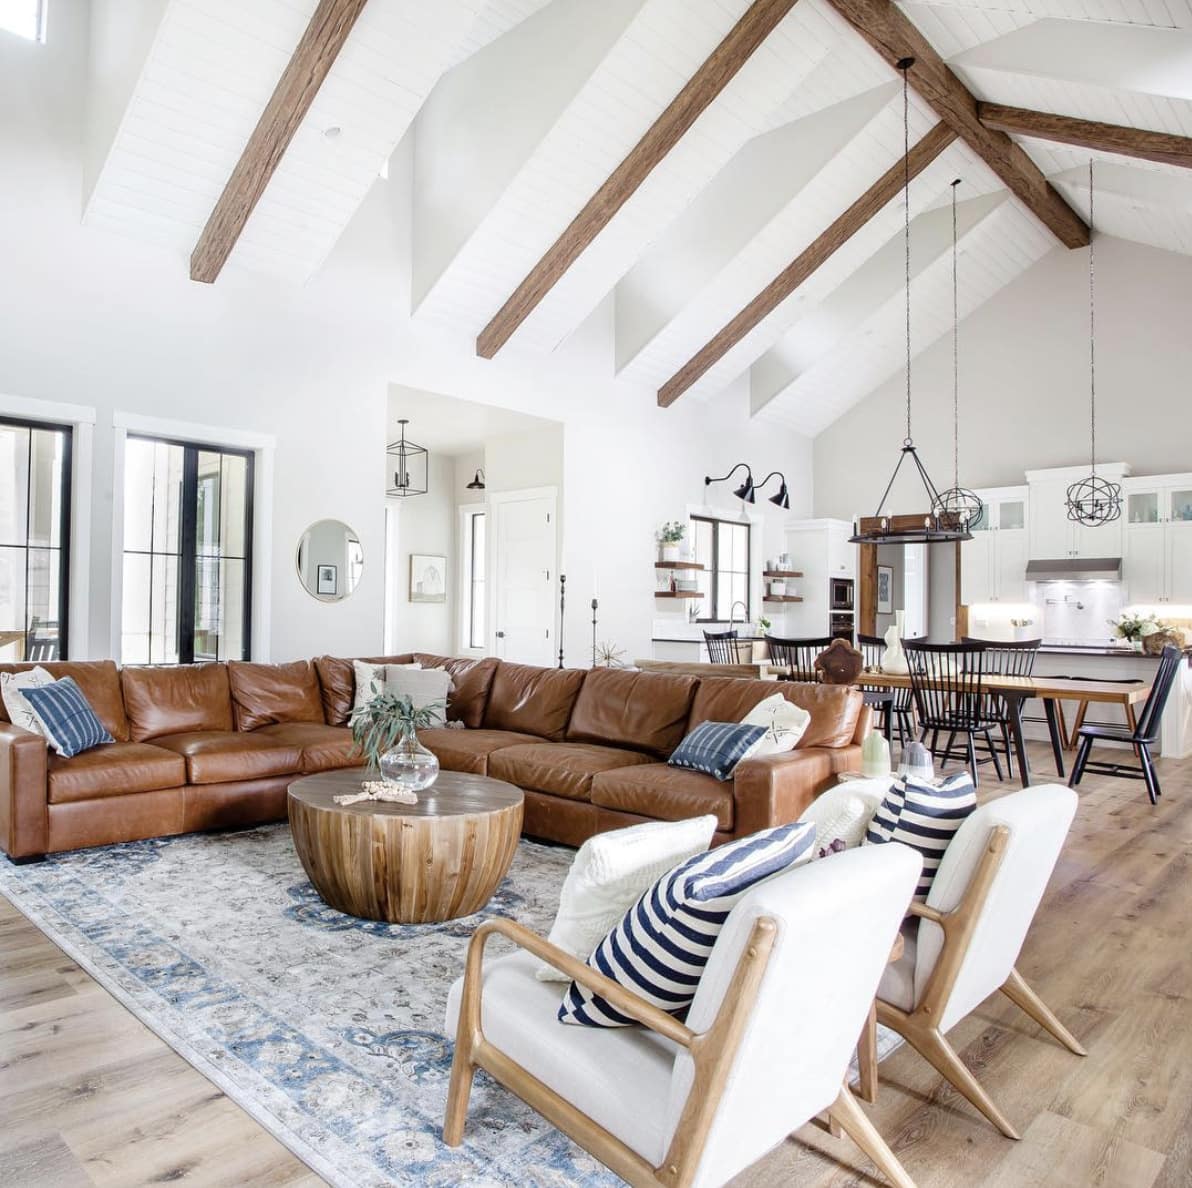 modern farmhouse-style great room with large living room rug placed under the sectional sofa and armchairs